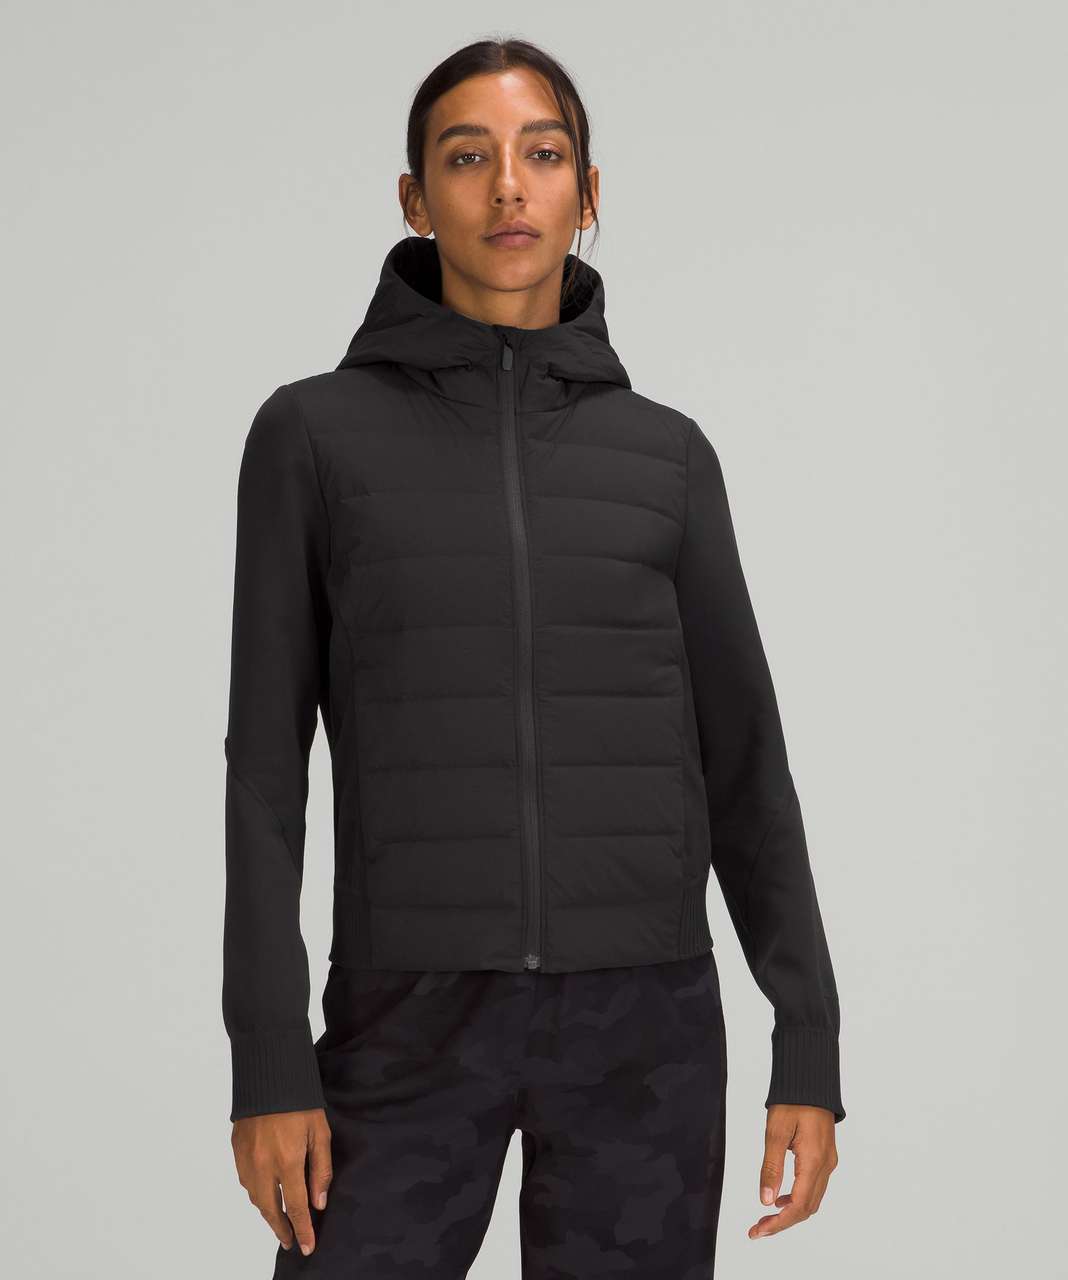 NWT~Lululemon DOWN FOR IT ALL JACKET Reflective 700 Fill Cassis Glyde  Hoodie 4